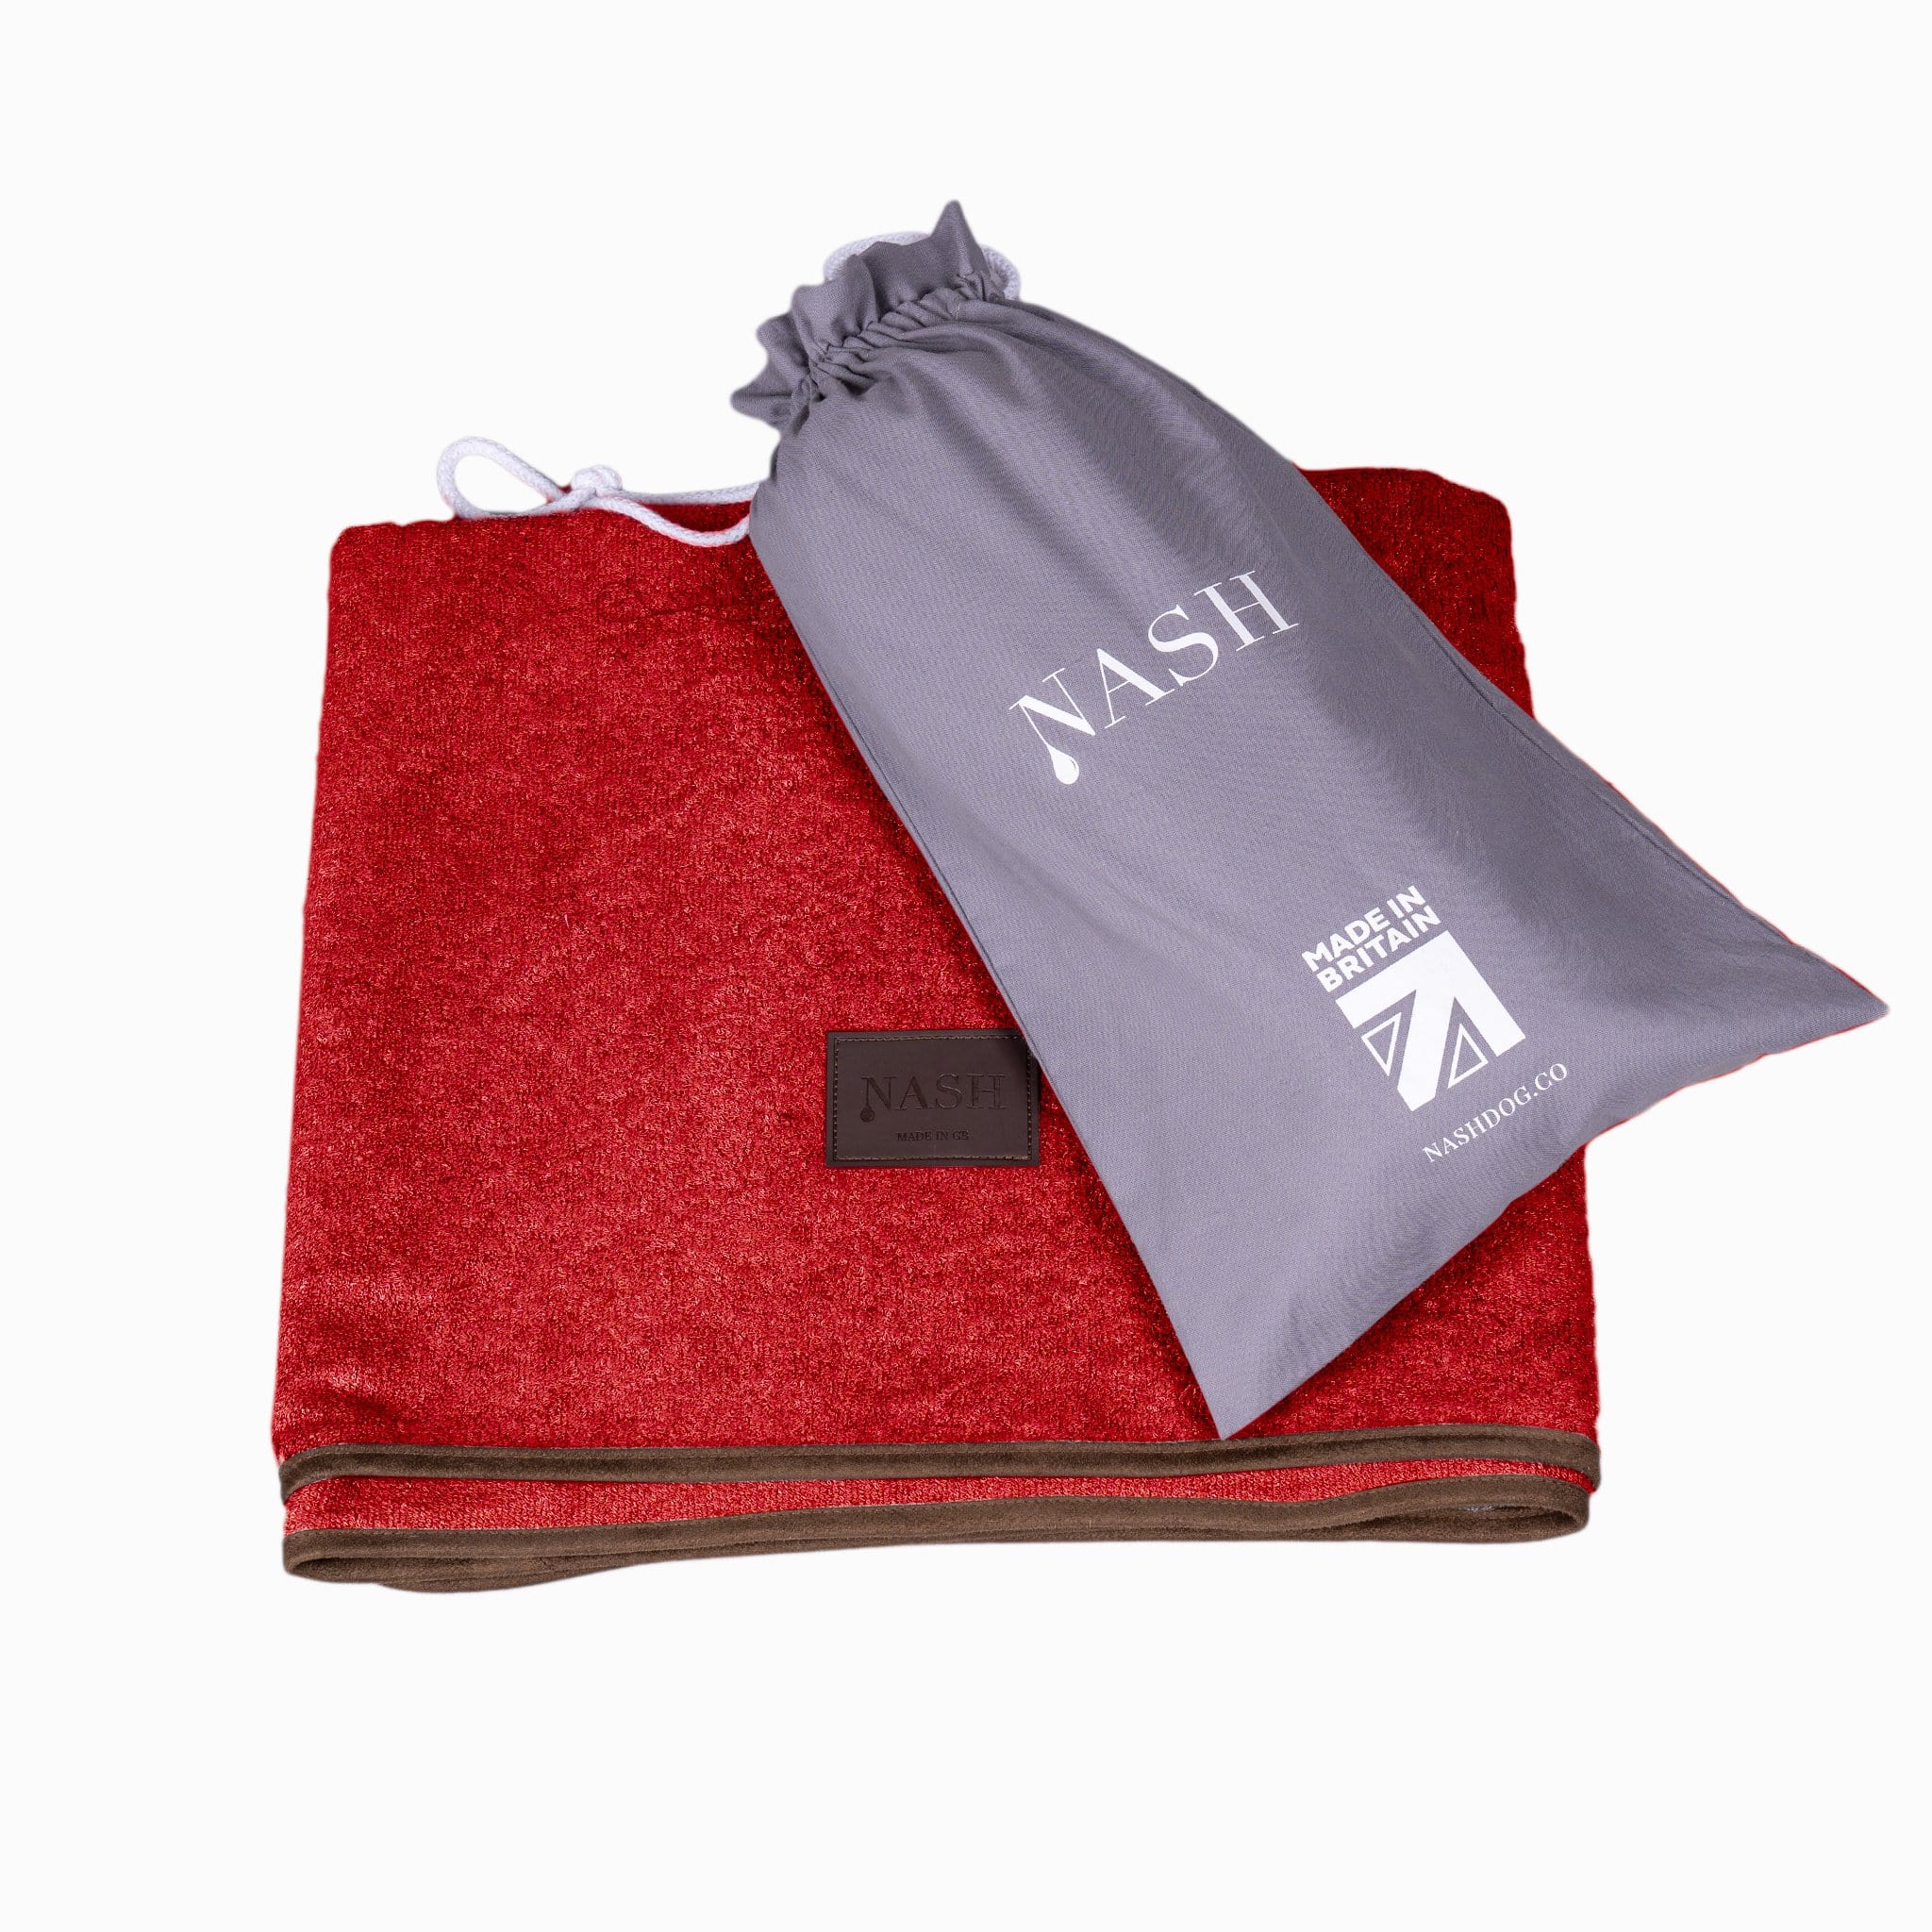 Folded NASH bamboo dog blanket in red, with its reusable bag placed on top.